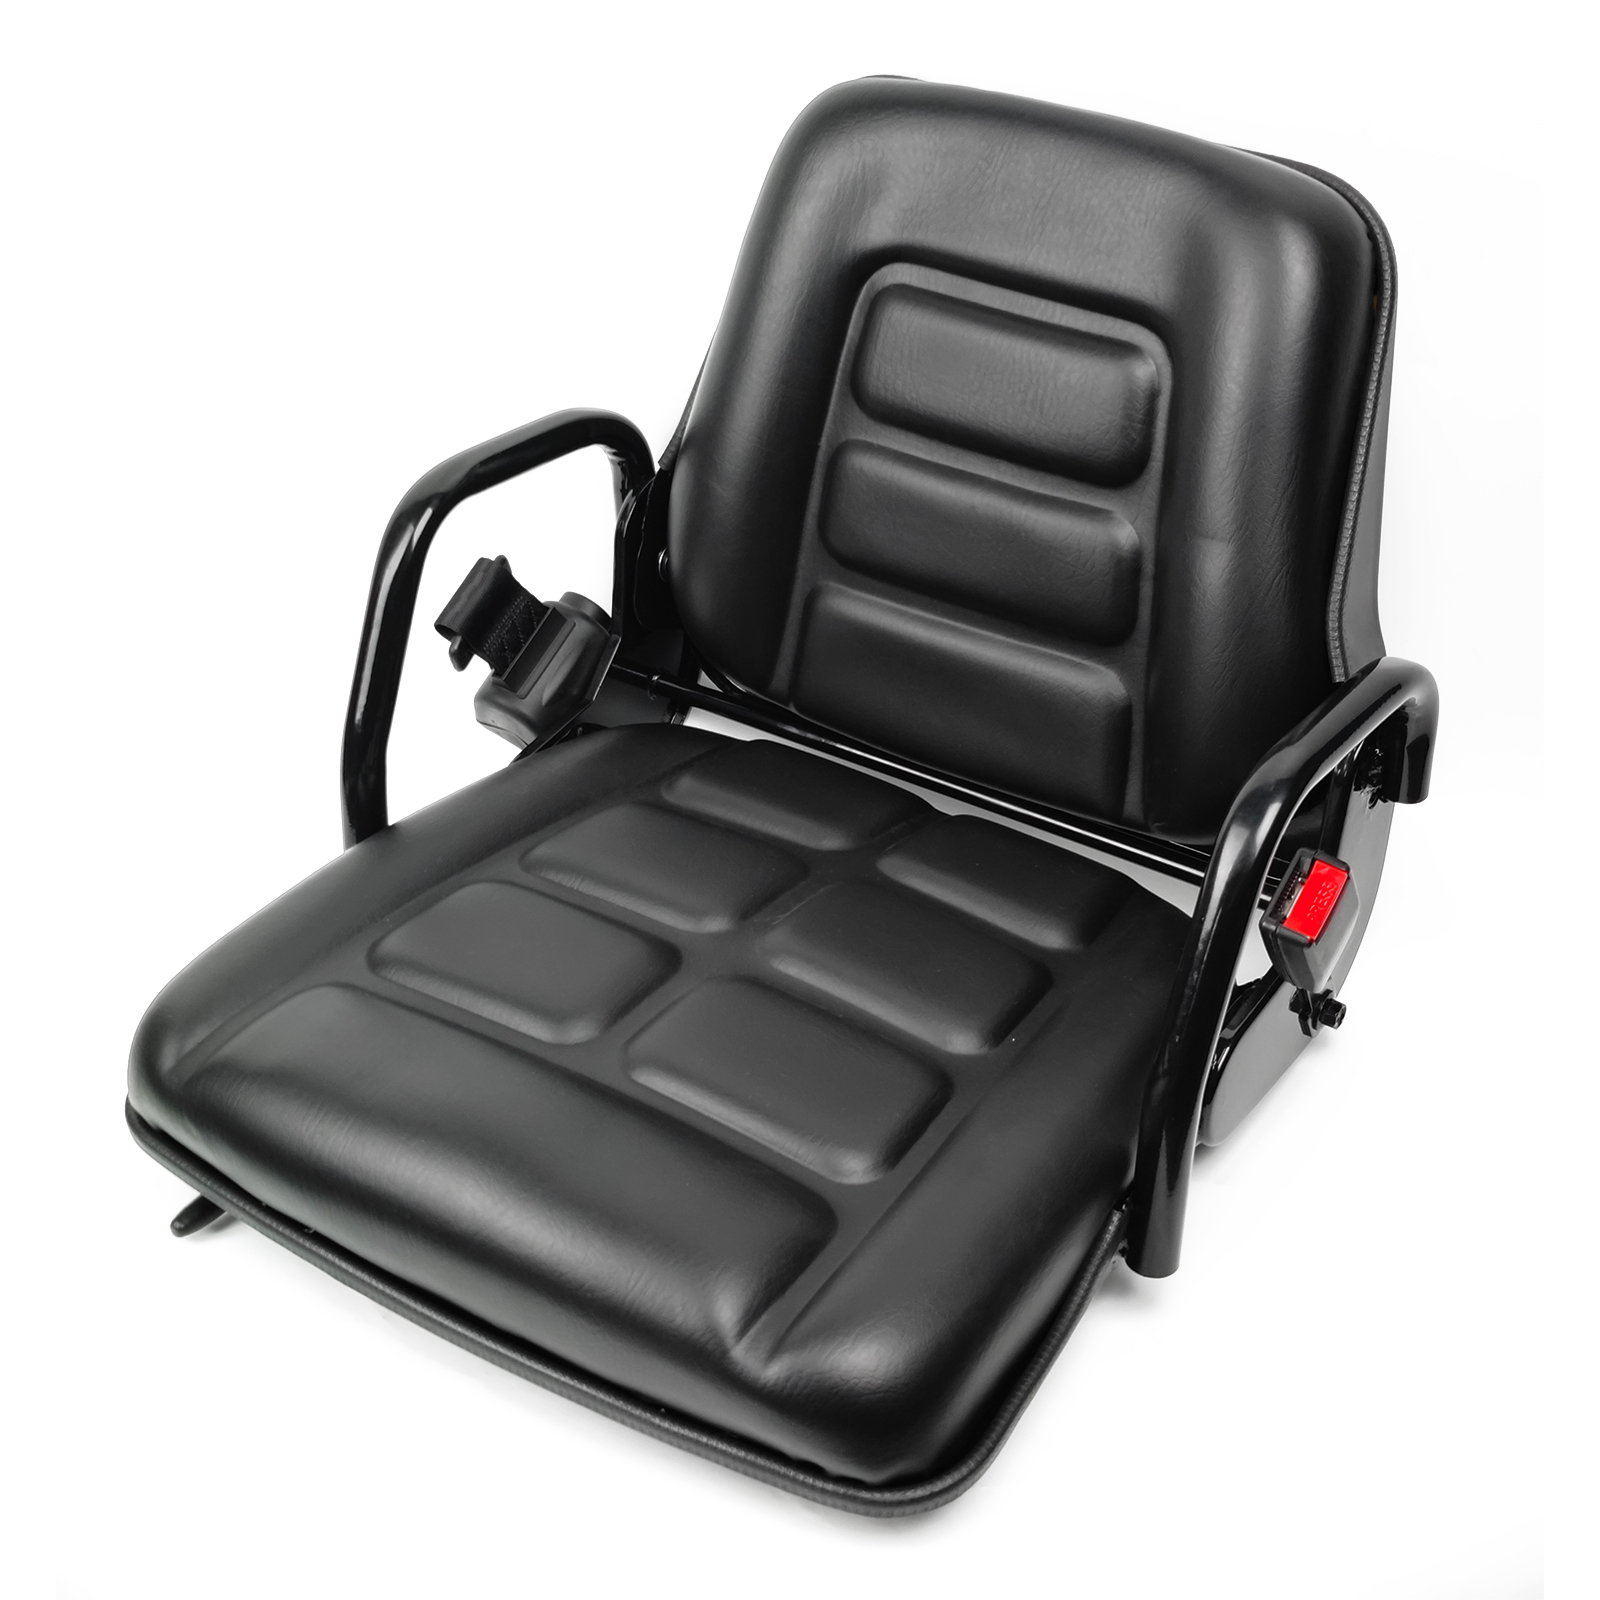 High Quality for Suspension Tractor Seat - Forklift Seat with Integrated Steel Armrest Fold Down Backrest Fits Caterpillar Mitsubishi Doosan forklifts – Qinglin Seat